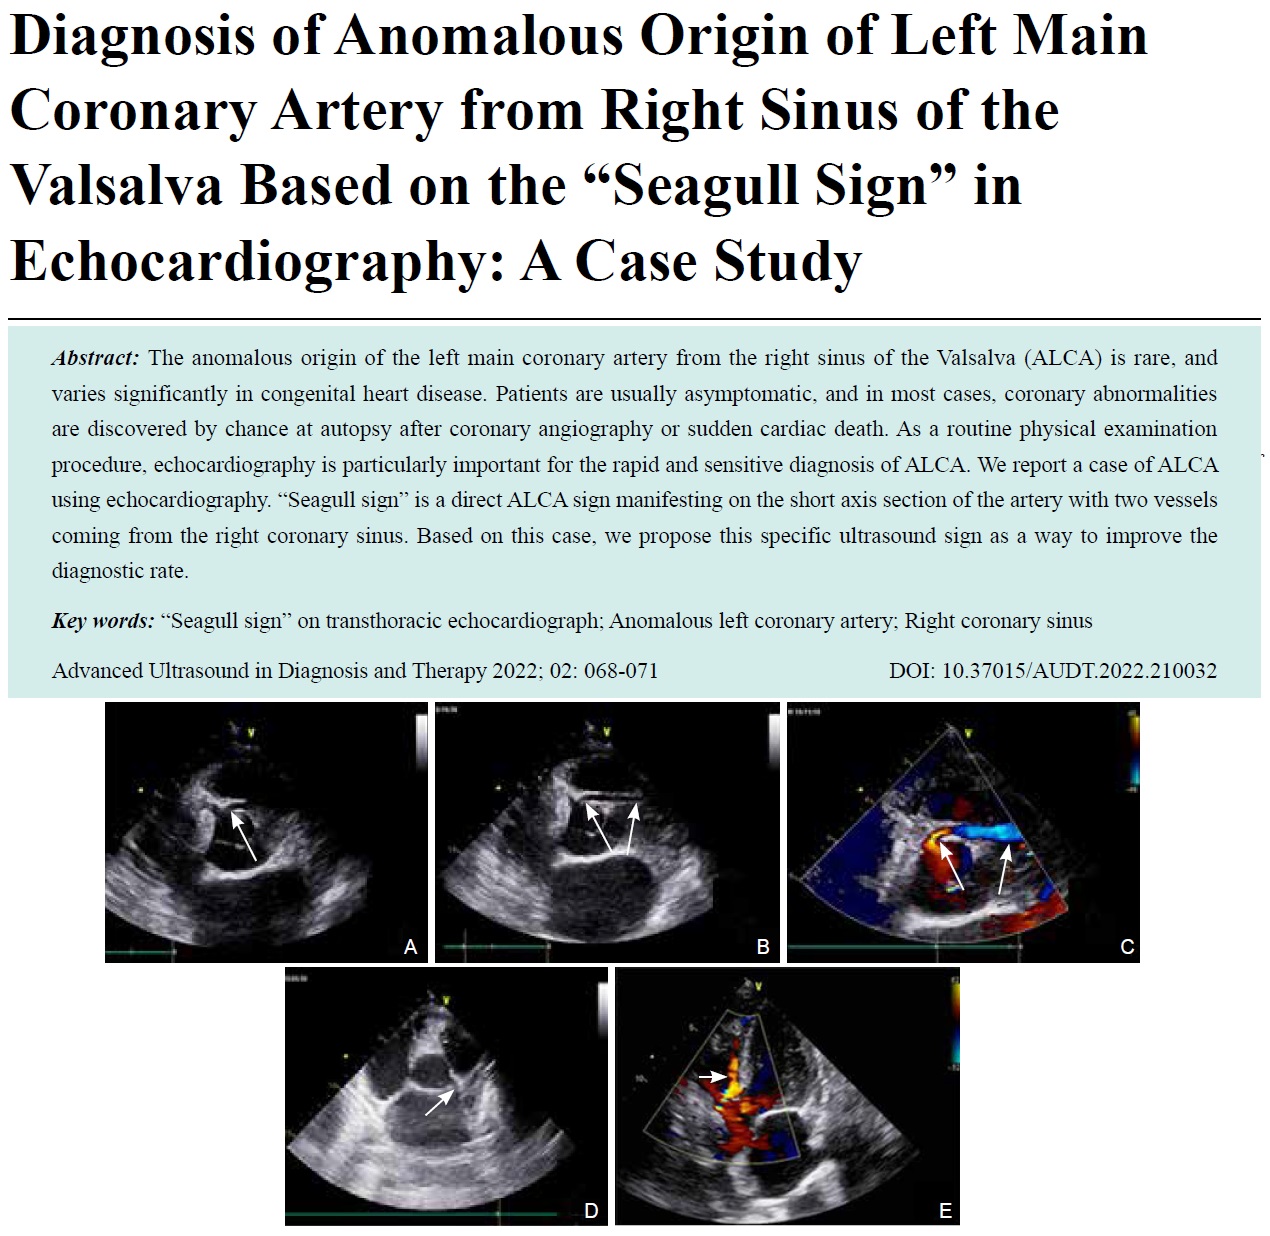 Diagnosis of Anomalous Origin of Left Main Coronary Artery from Right Sinus of the Valsalva Based on the “Seagull Sign” in Echocardiography: A Case Study